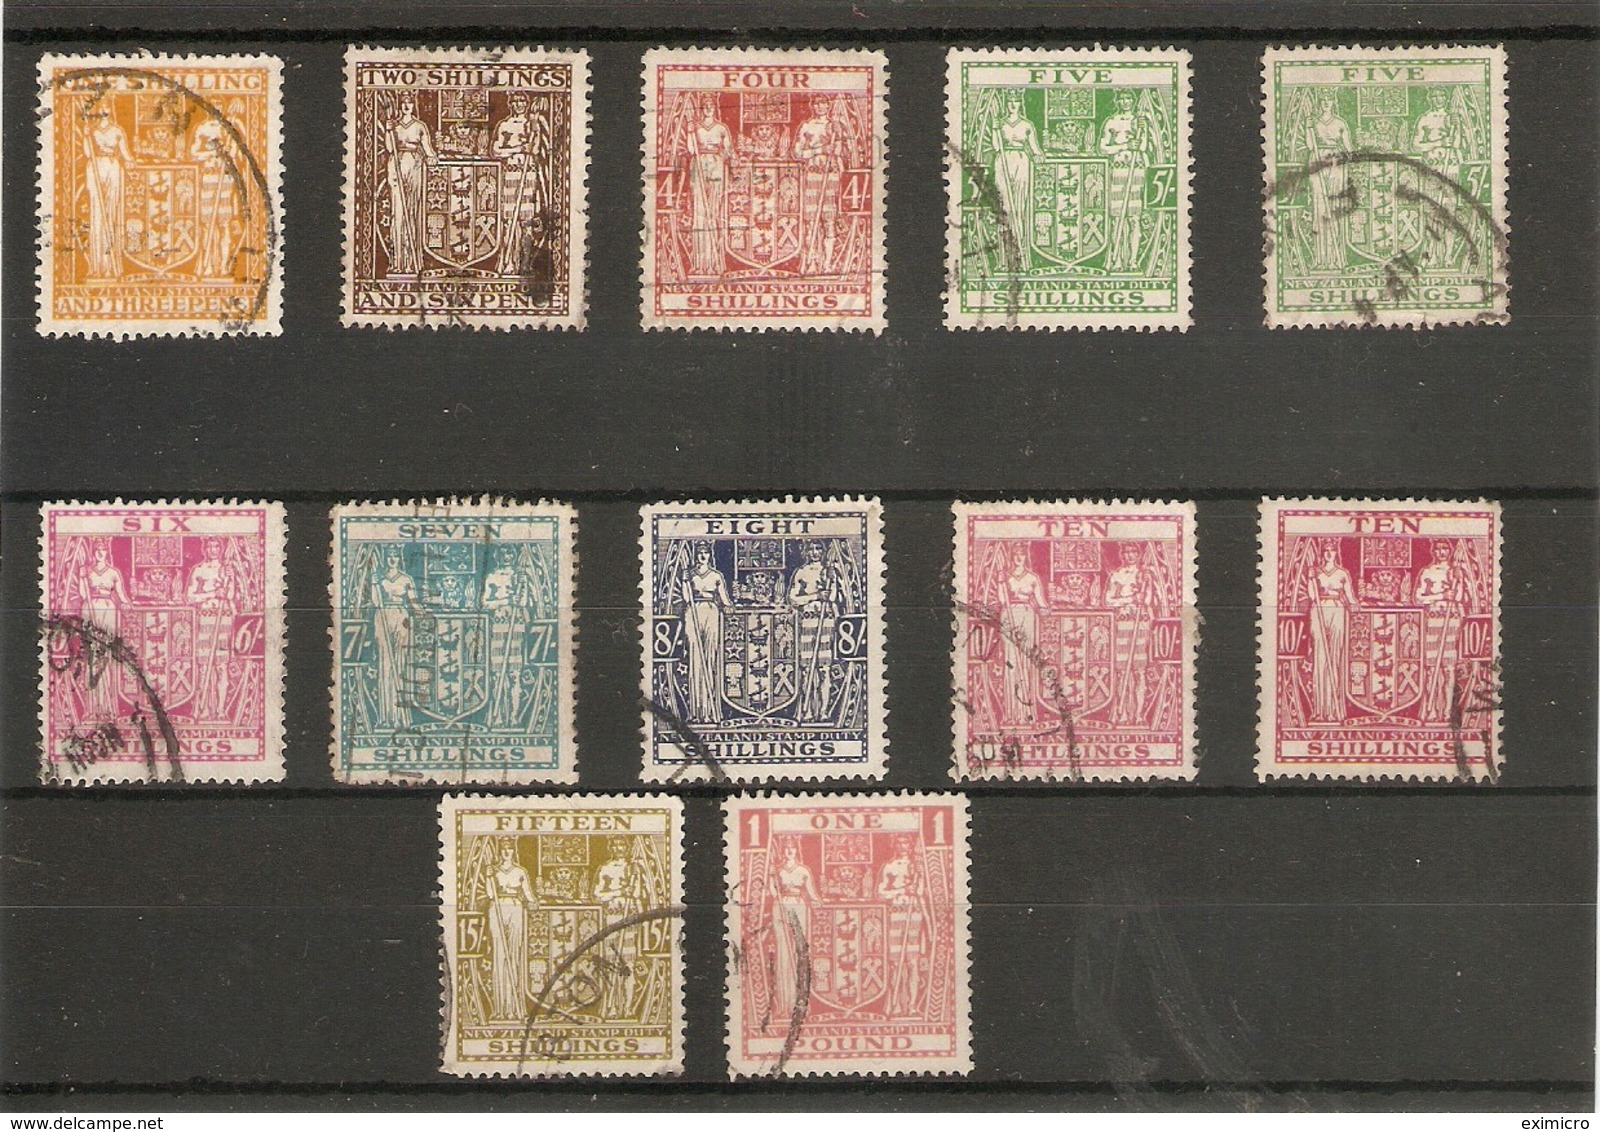 NEW ZEALAND 1940 - 1958 POSTAL FISCALS TO £1 BETWEEN SG F191 AND SG F203W FINE USED Cat £73+ - Fiscal-postal